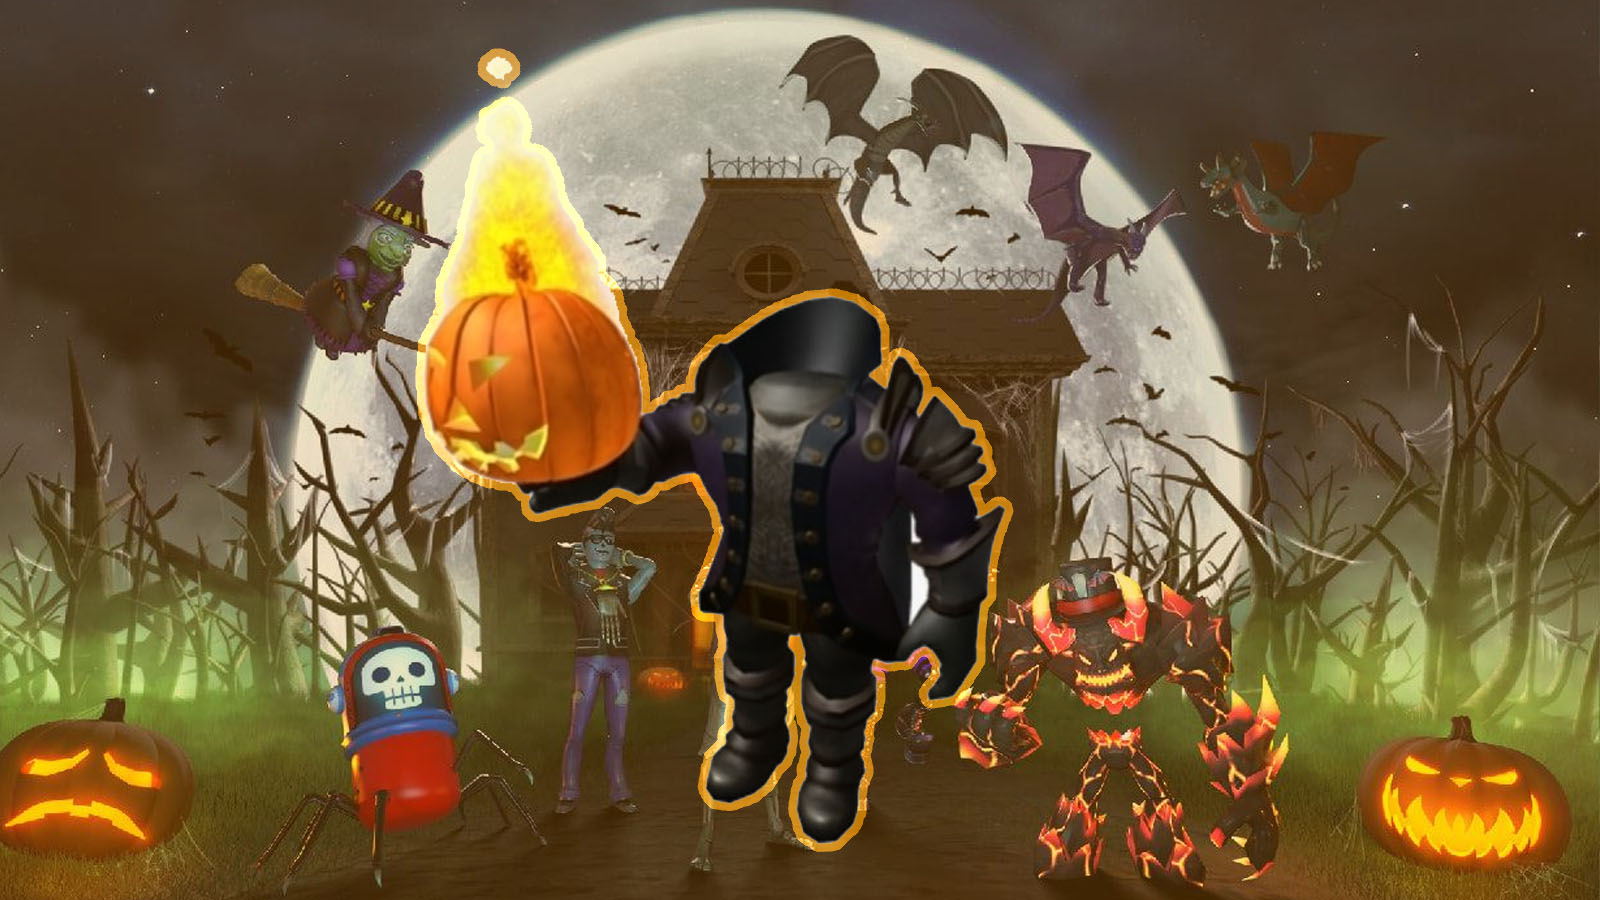 RBLXWild on X: We are giving 3 lucky users Headless Horseman for